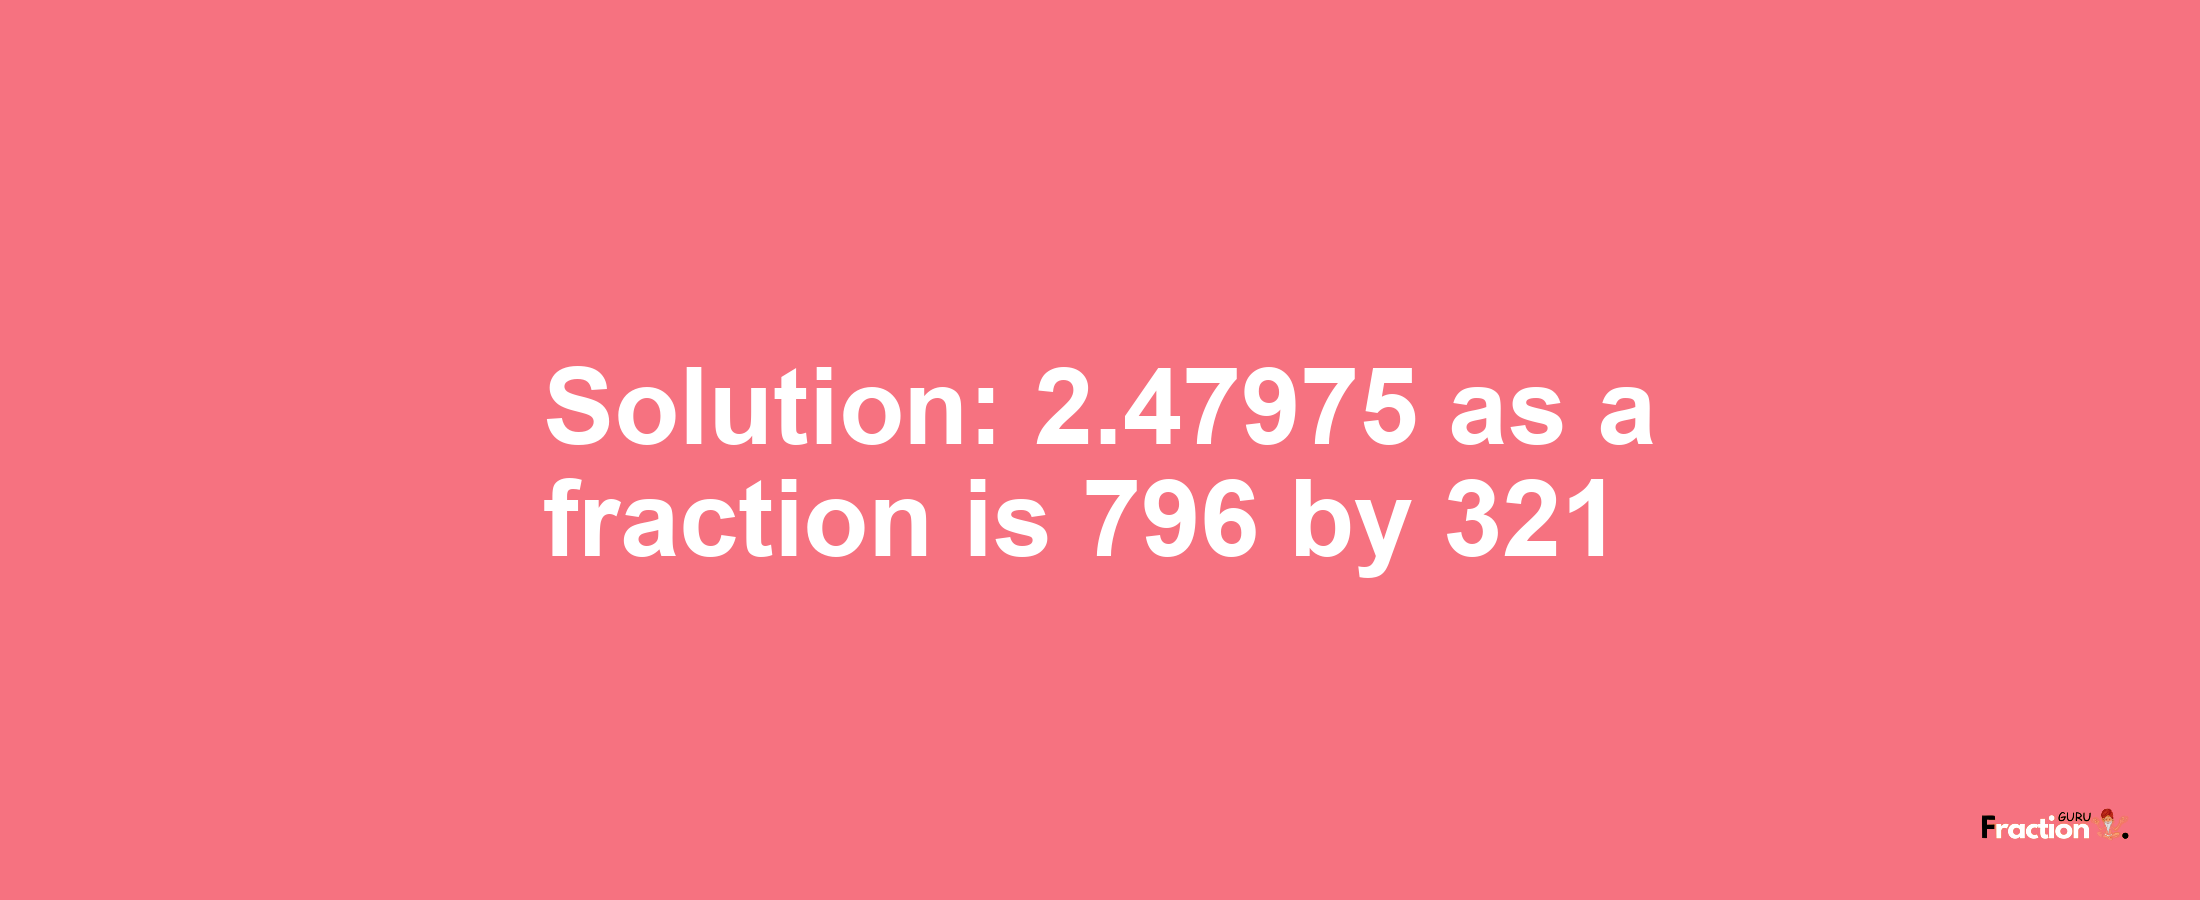 Solution:2.47975 as a fraction is 796/321